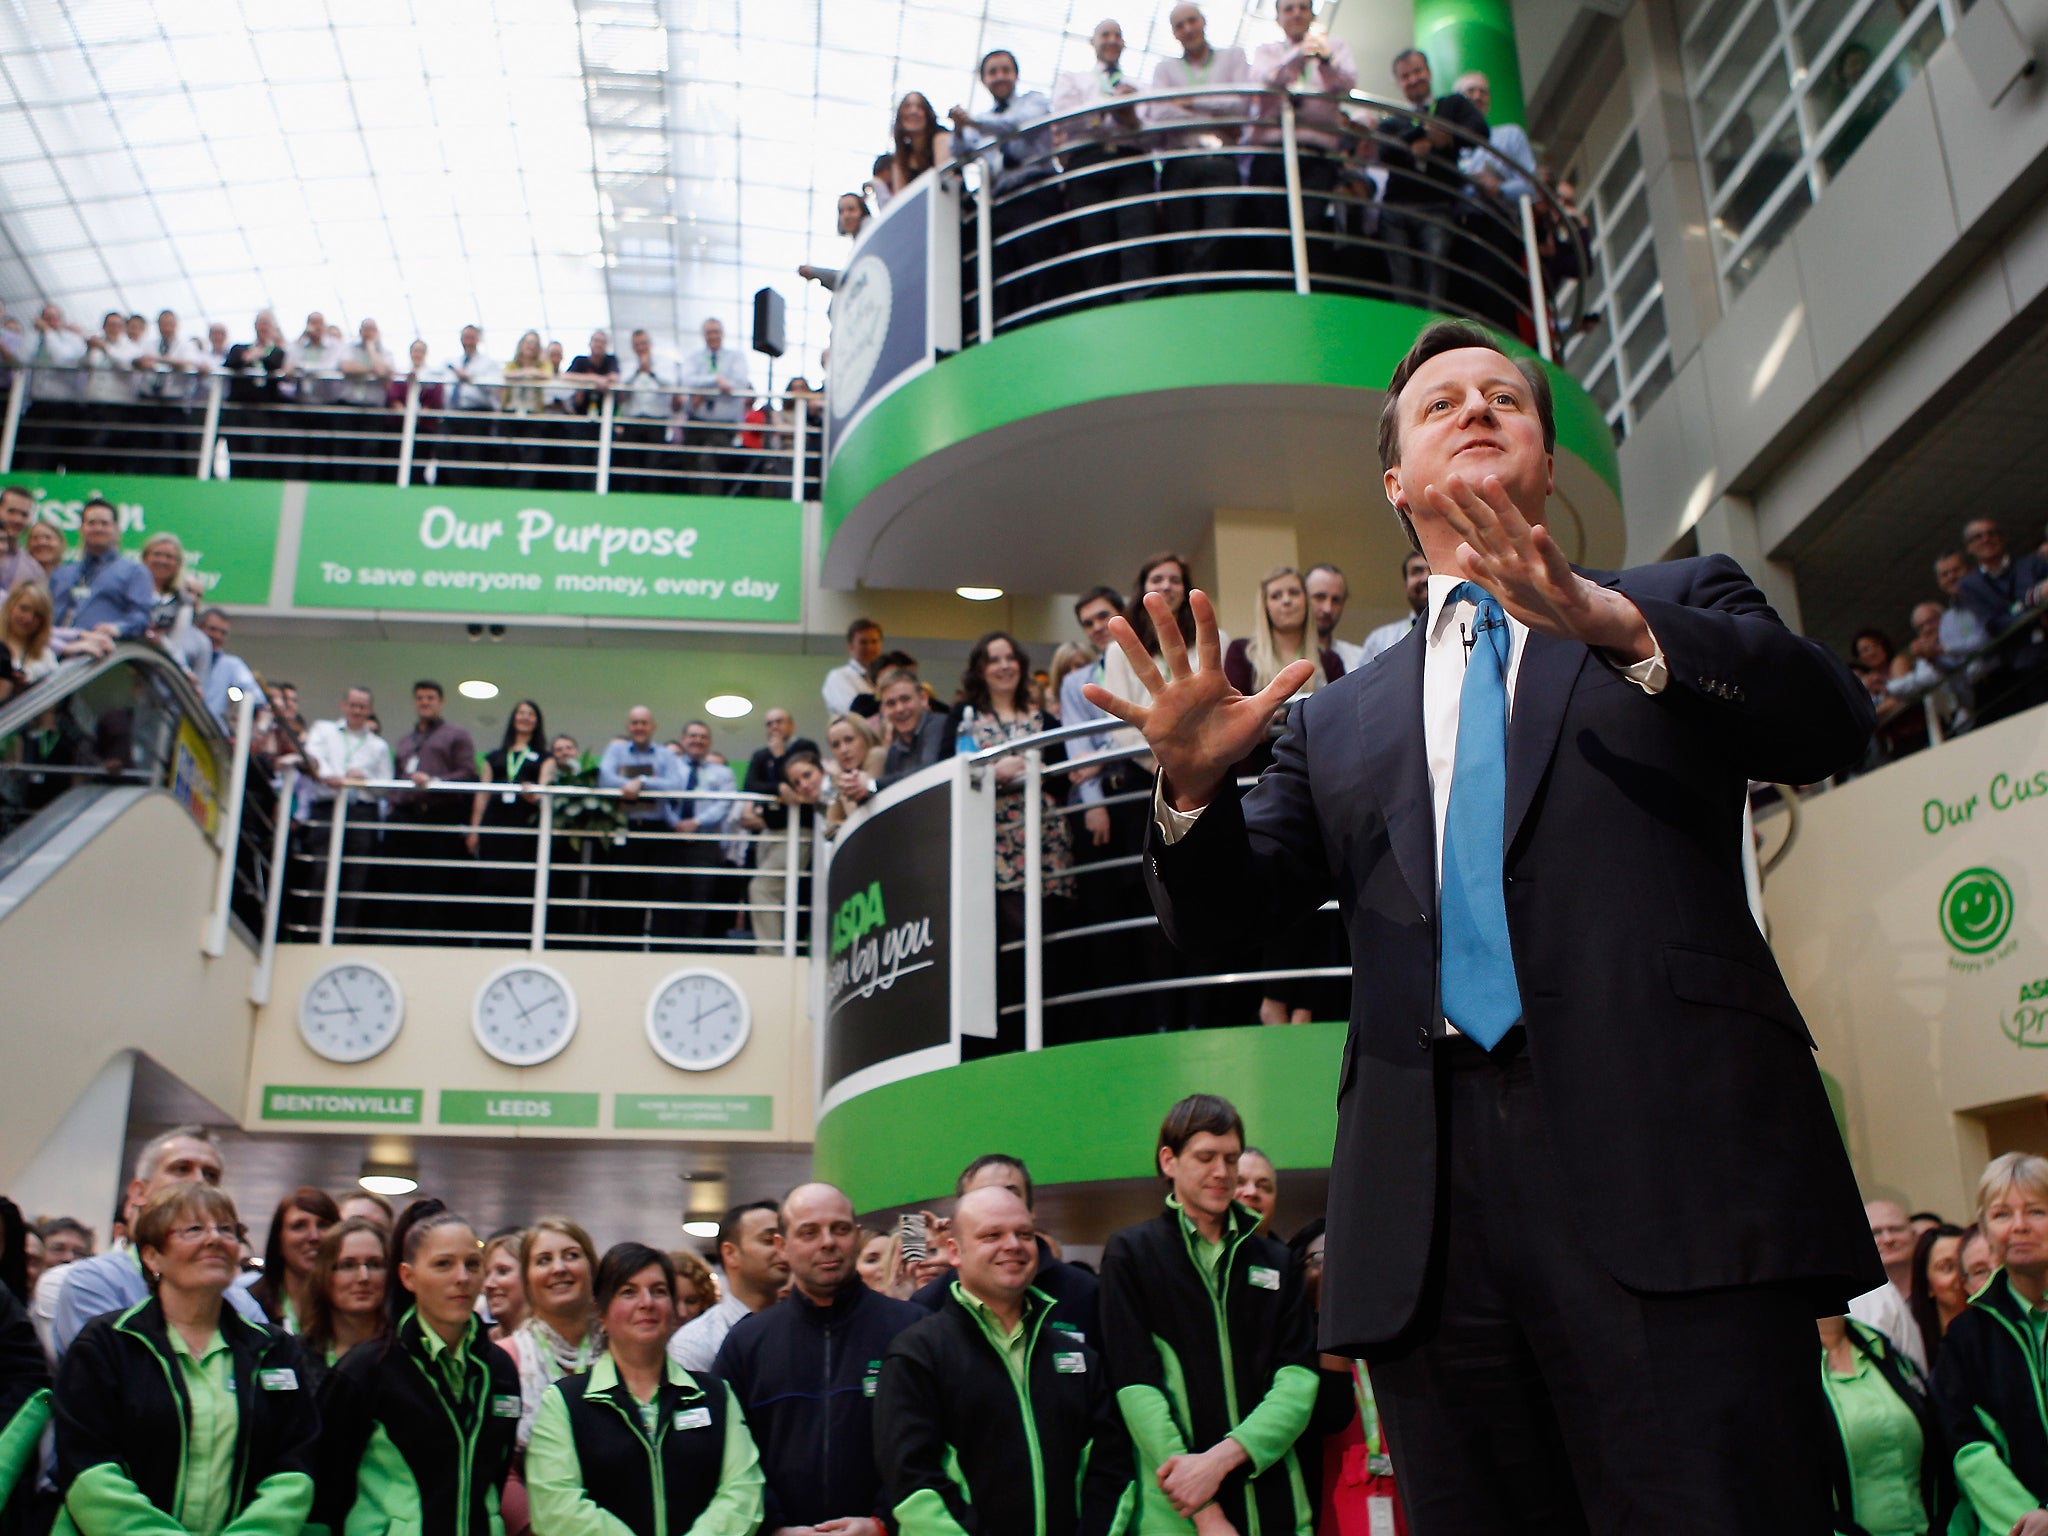 23 January 2012: David Cameron takes part in 'PM Direct' question and answer session with workers at the head office of supermarket giant Asda in Leeds